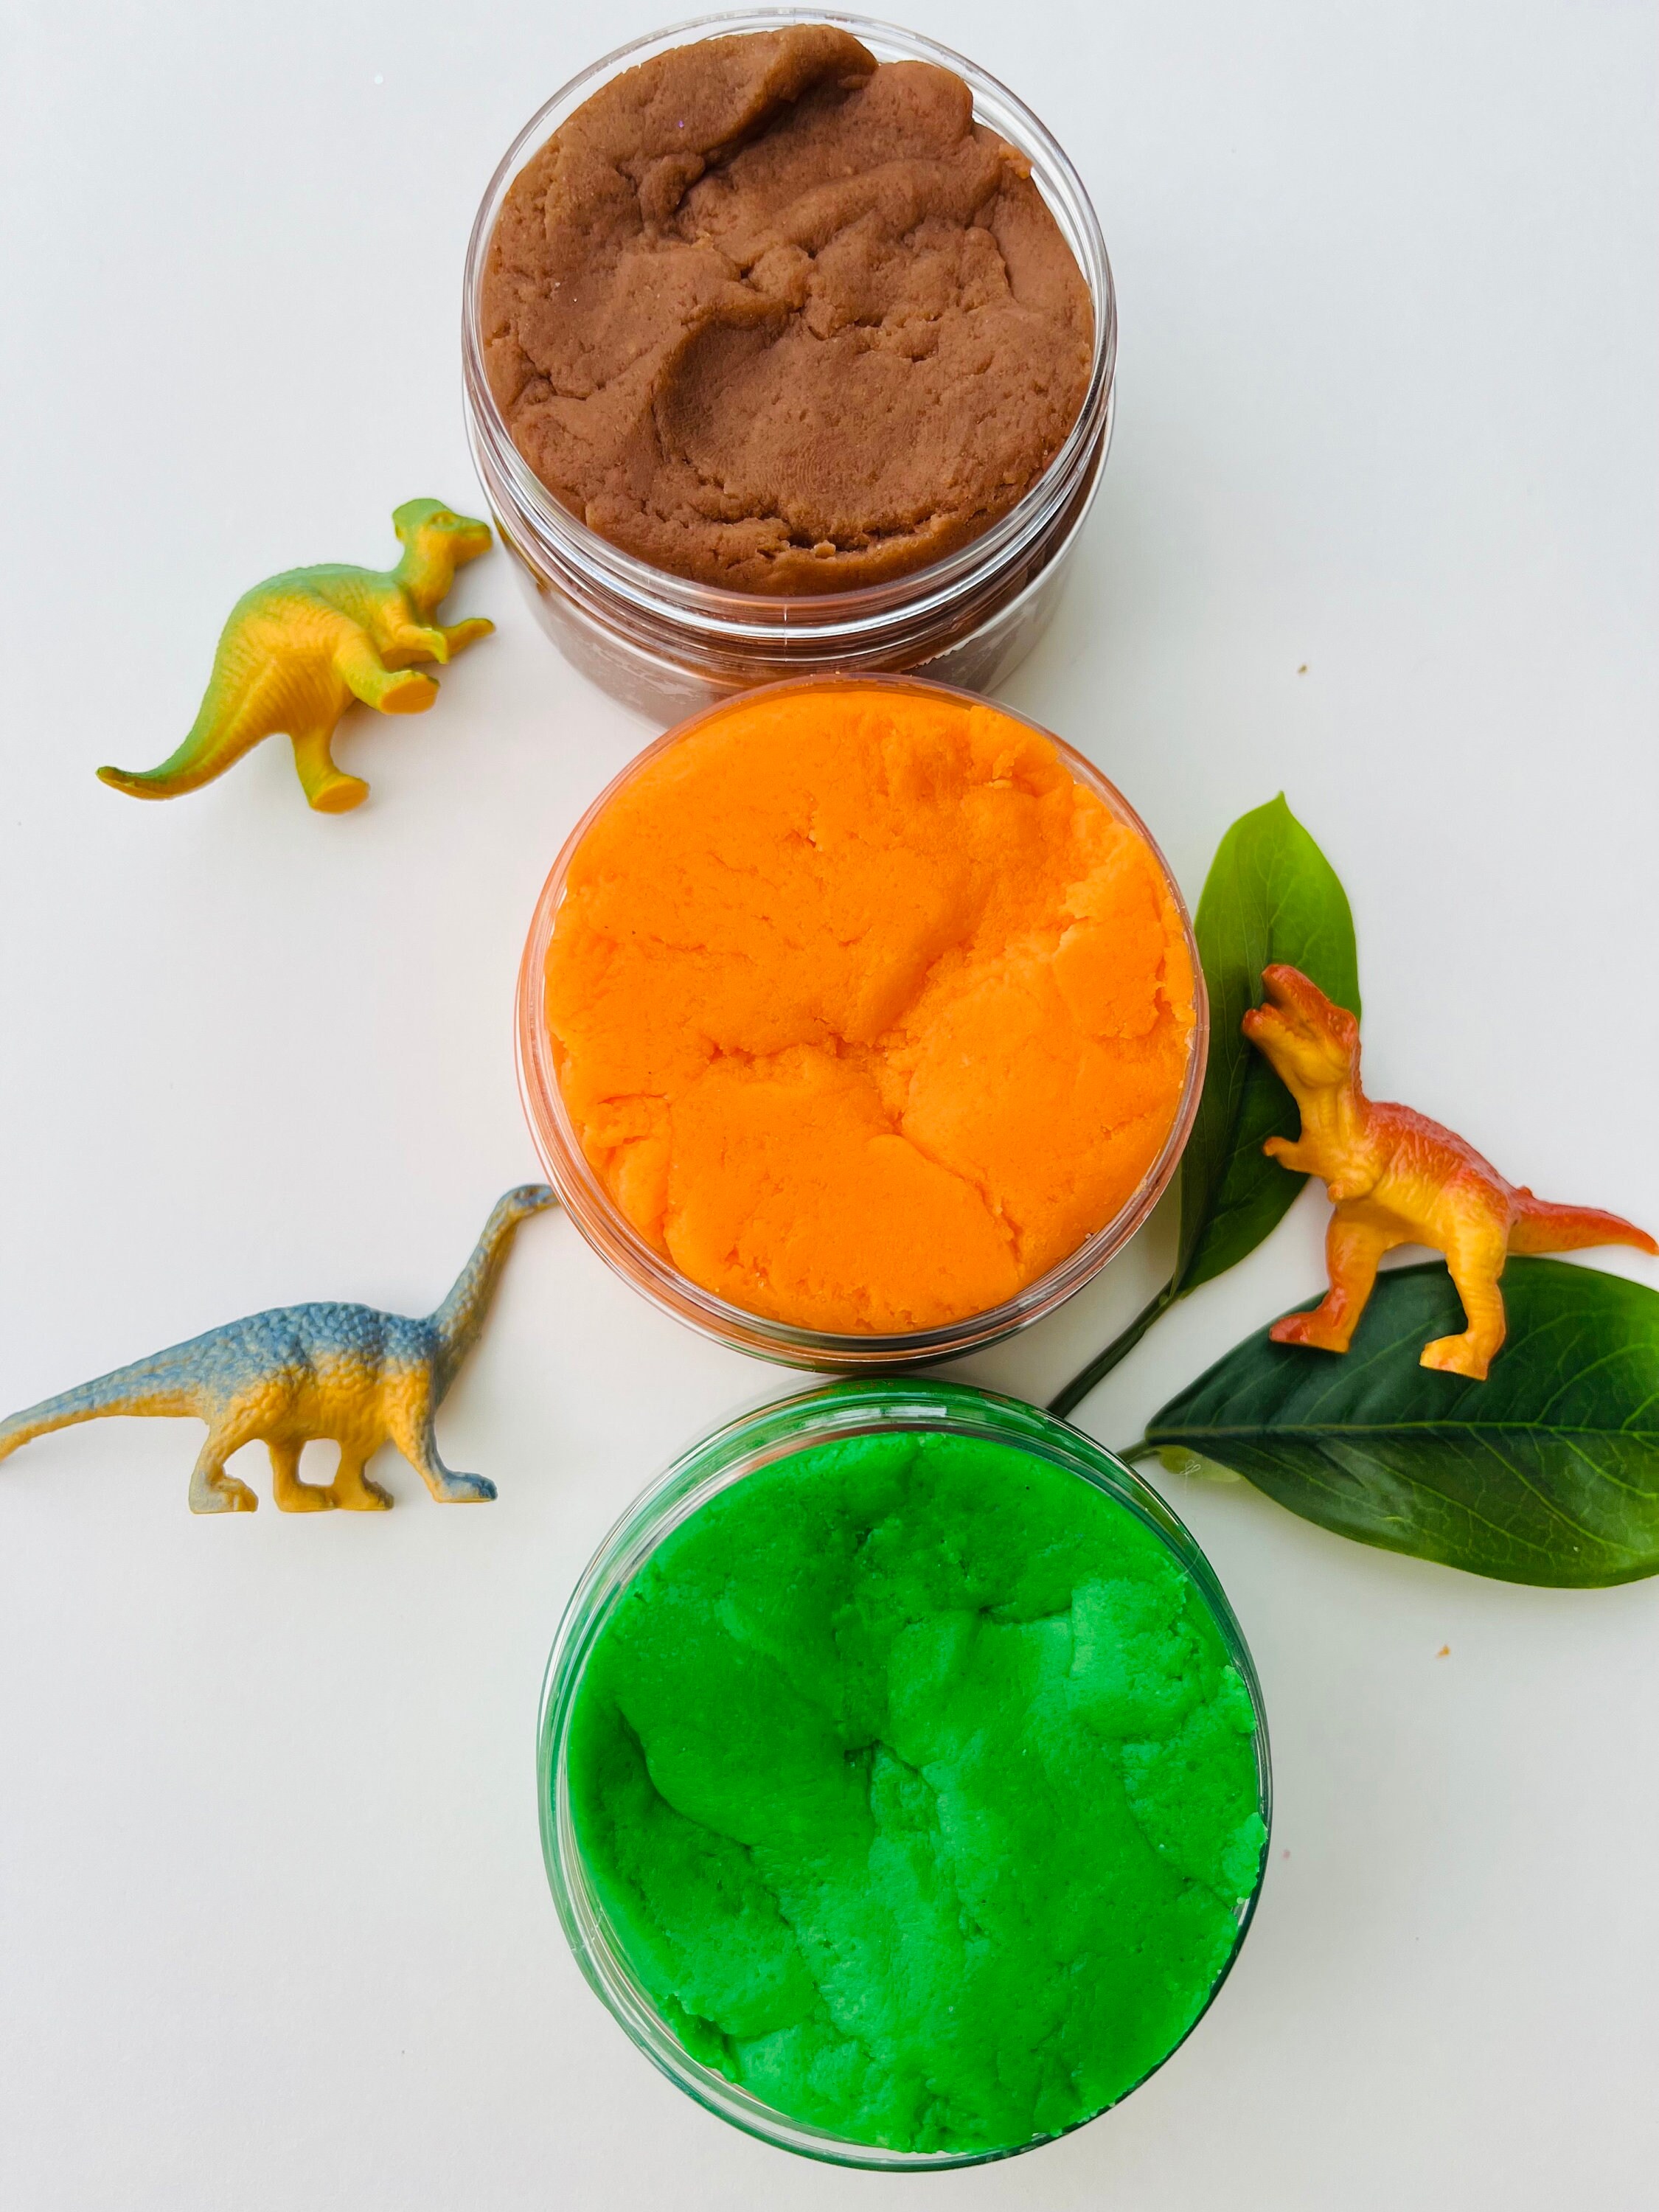 Homemade Non-toxic Playdough infused With Essential Oils 